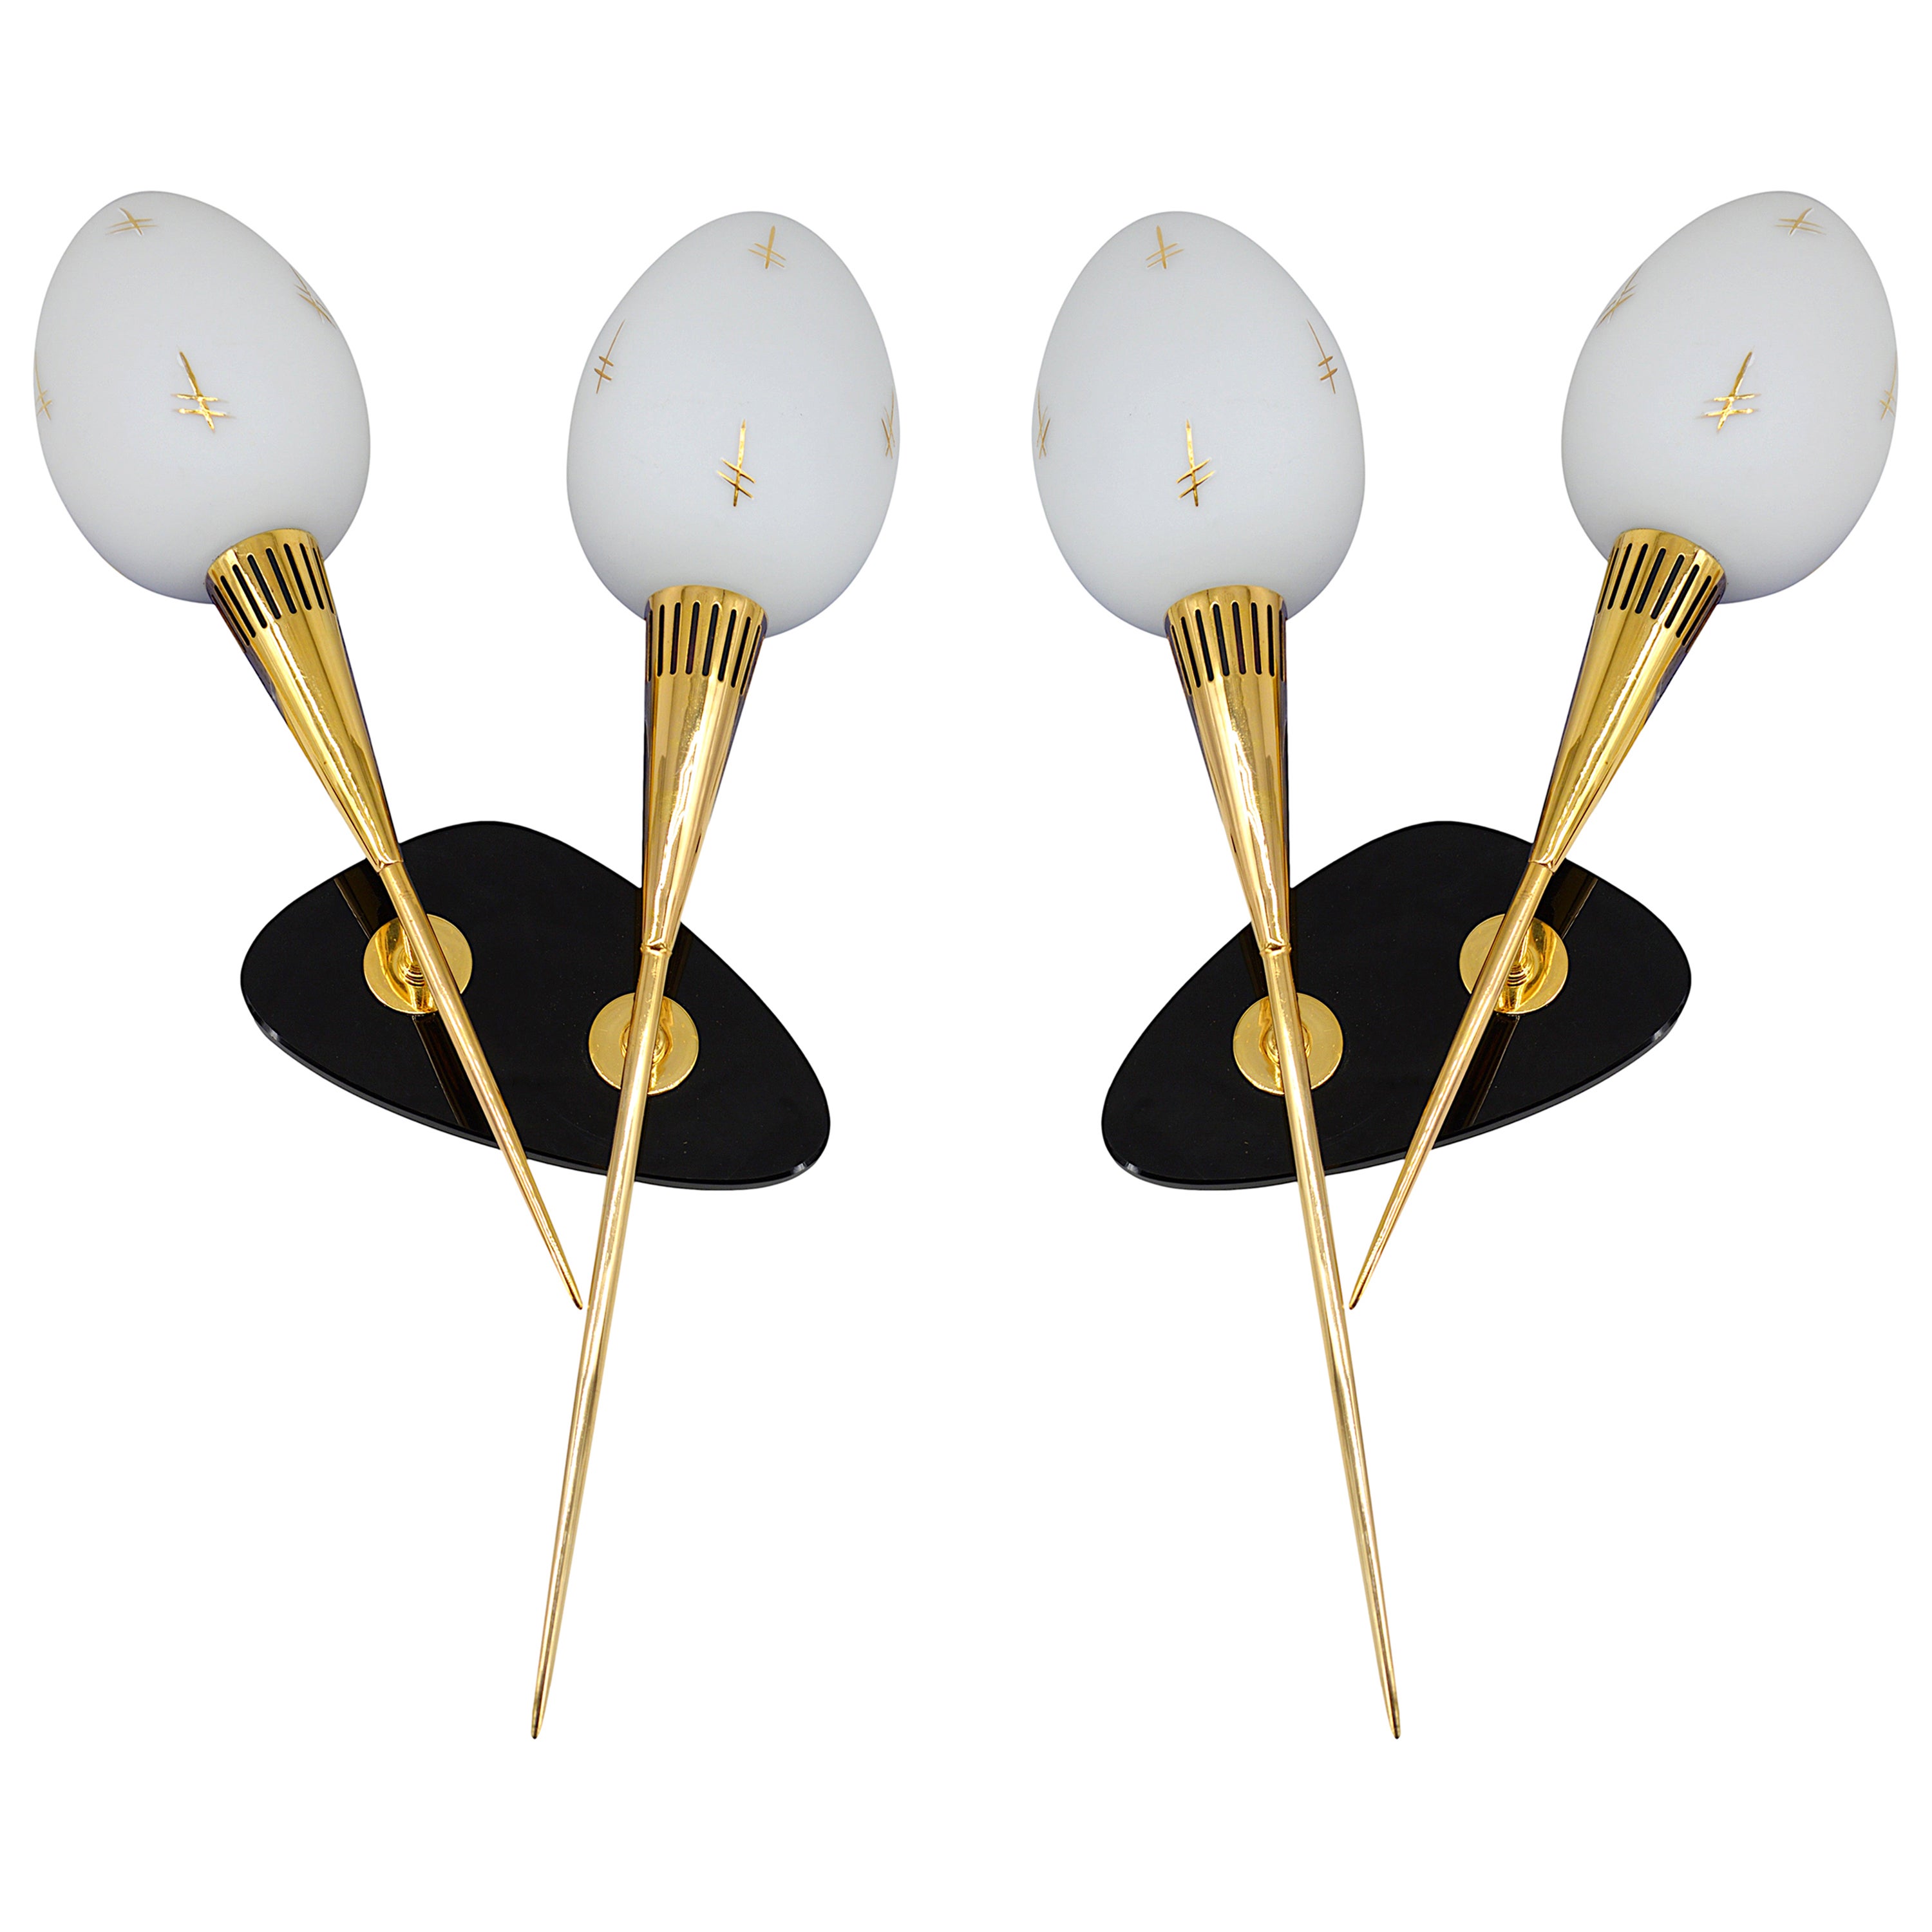 ARLUS Pair of Mid-Century Double Wall Sconces, 1950s